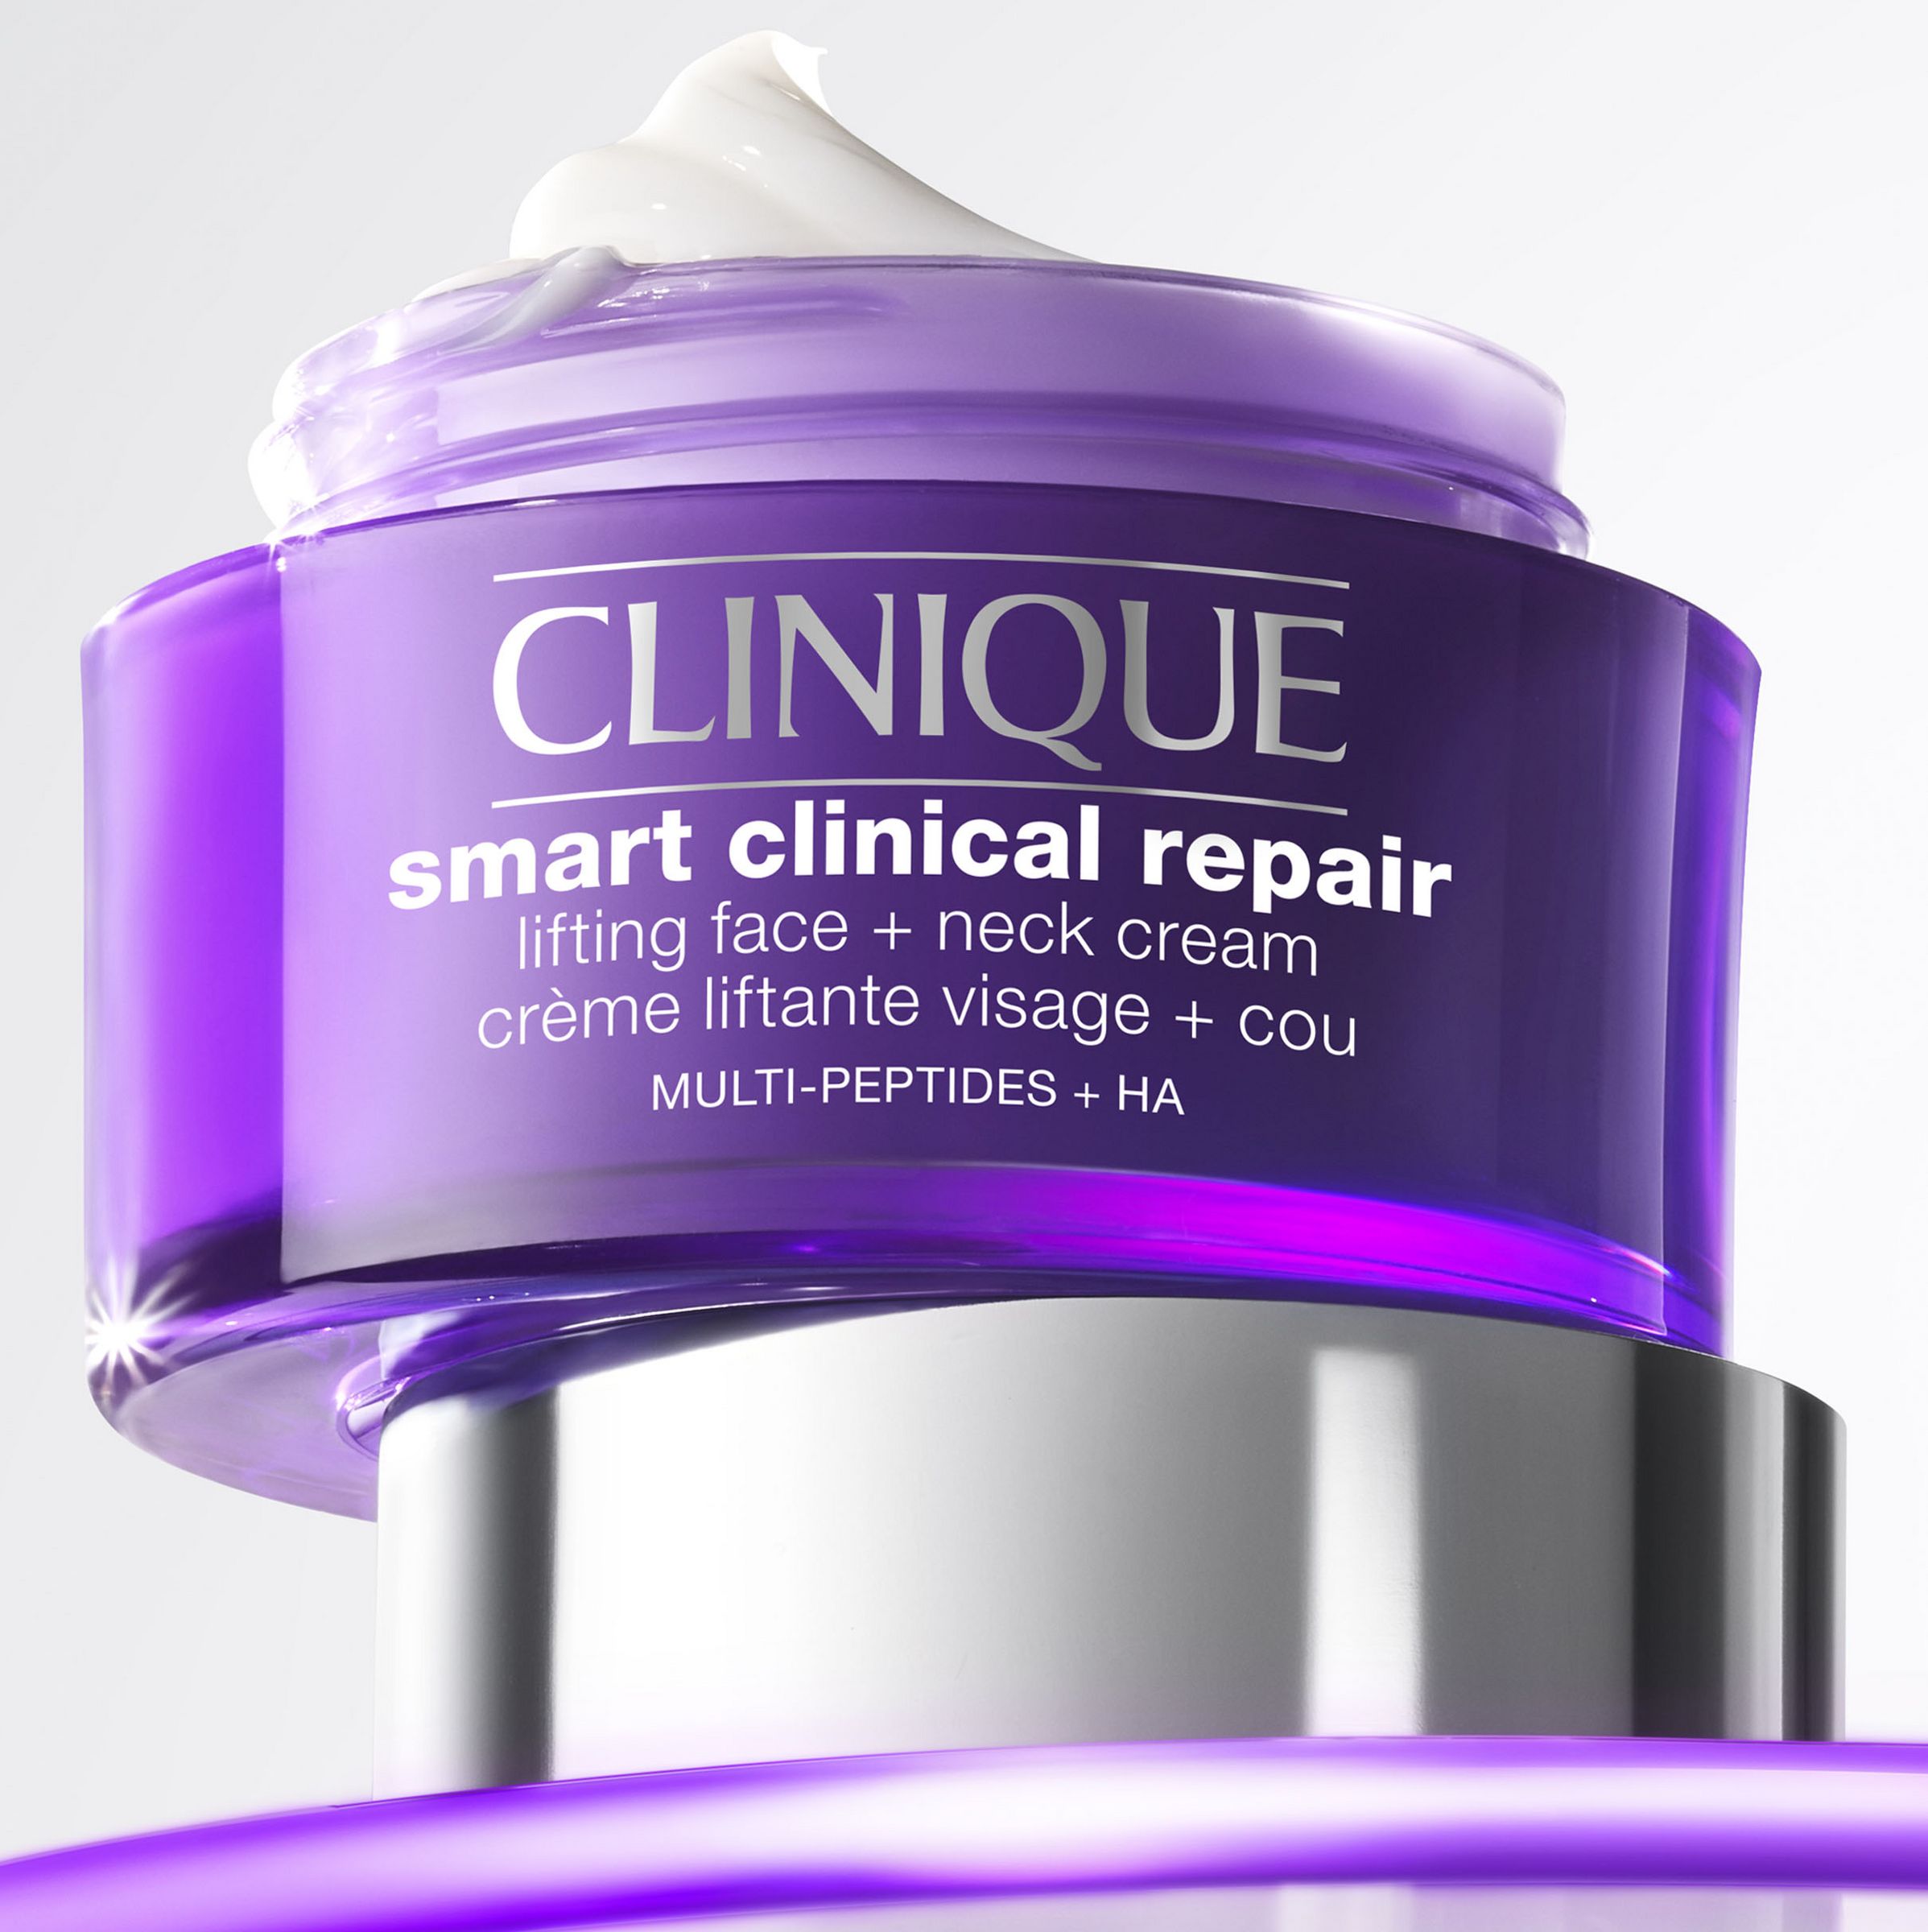 New from Clinique - Lifting face and neck cream